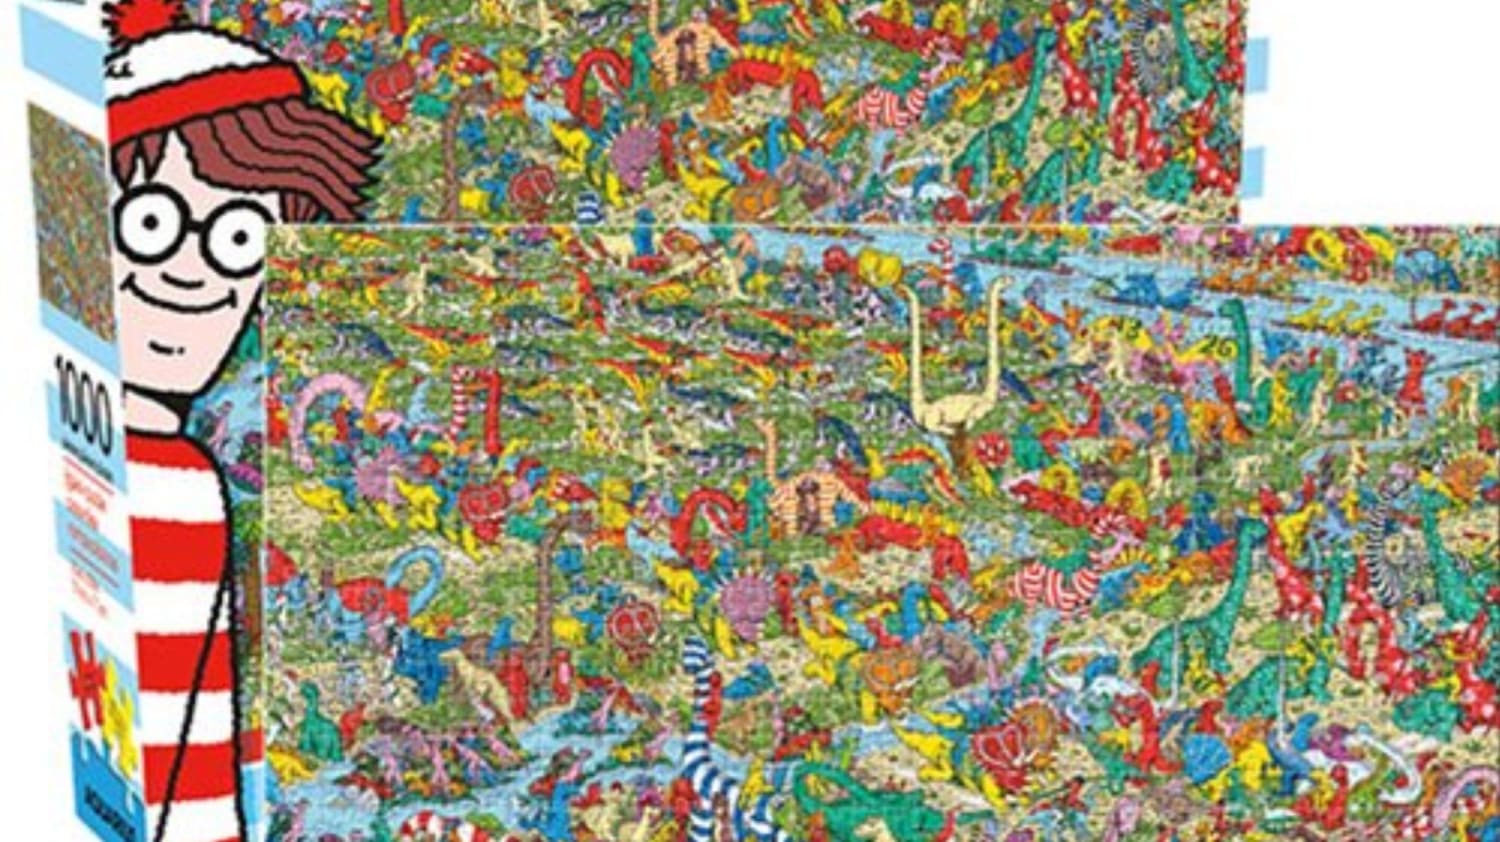 You May Finally Have Enough Time to Find Waldo in This 1000-Piece Puzzle